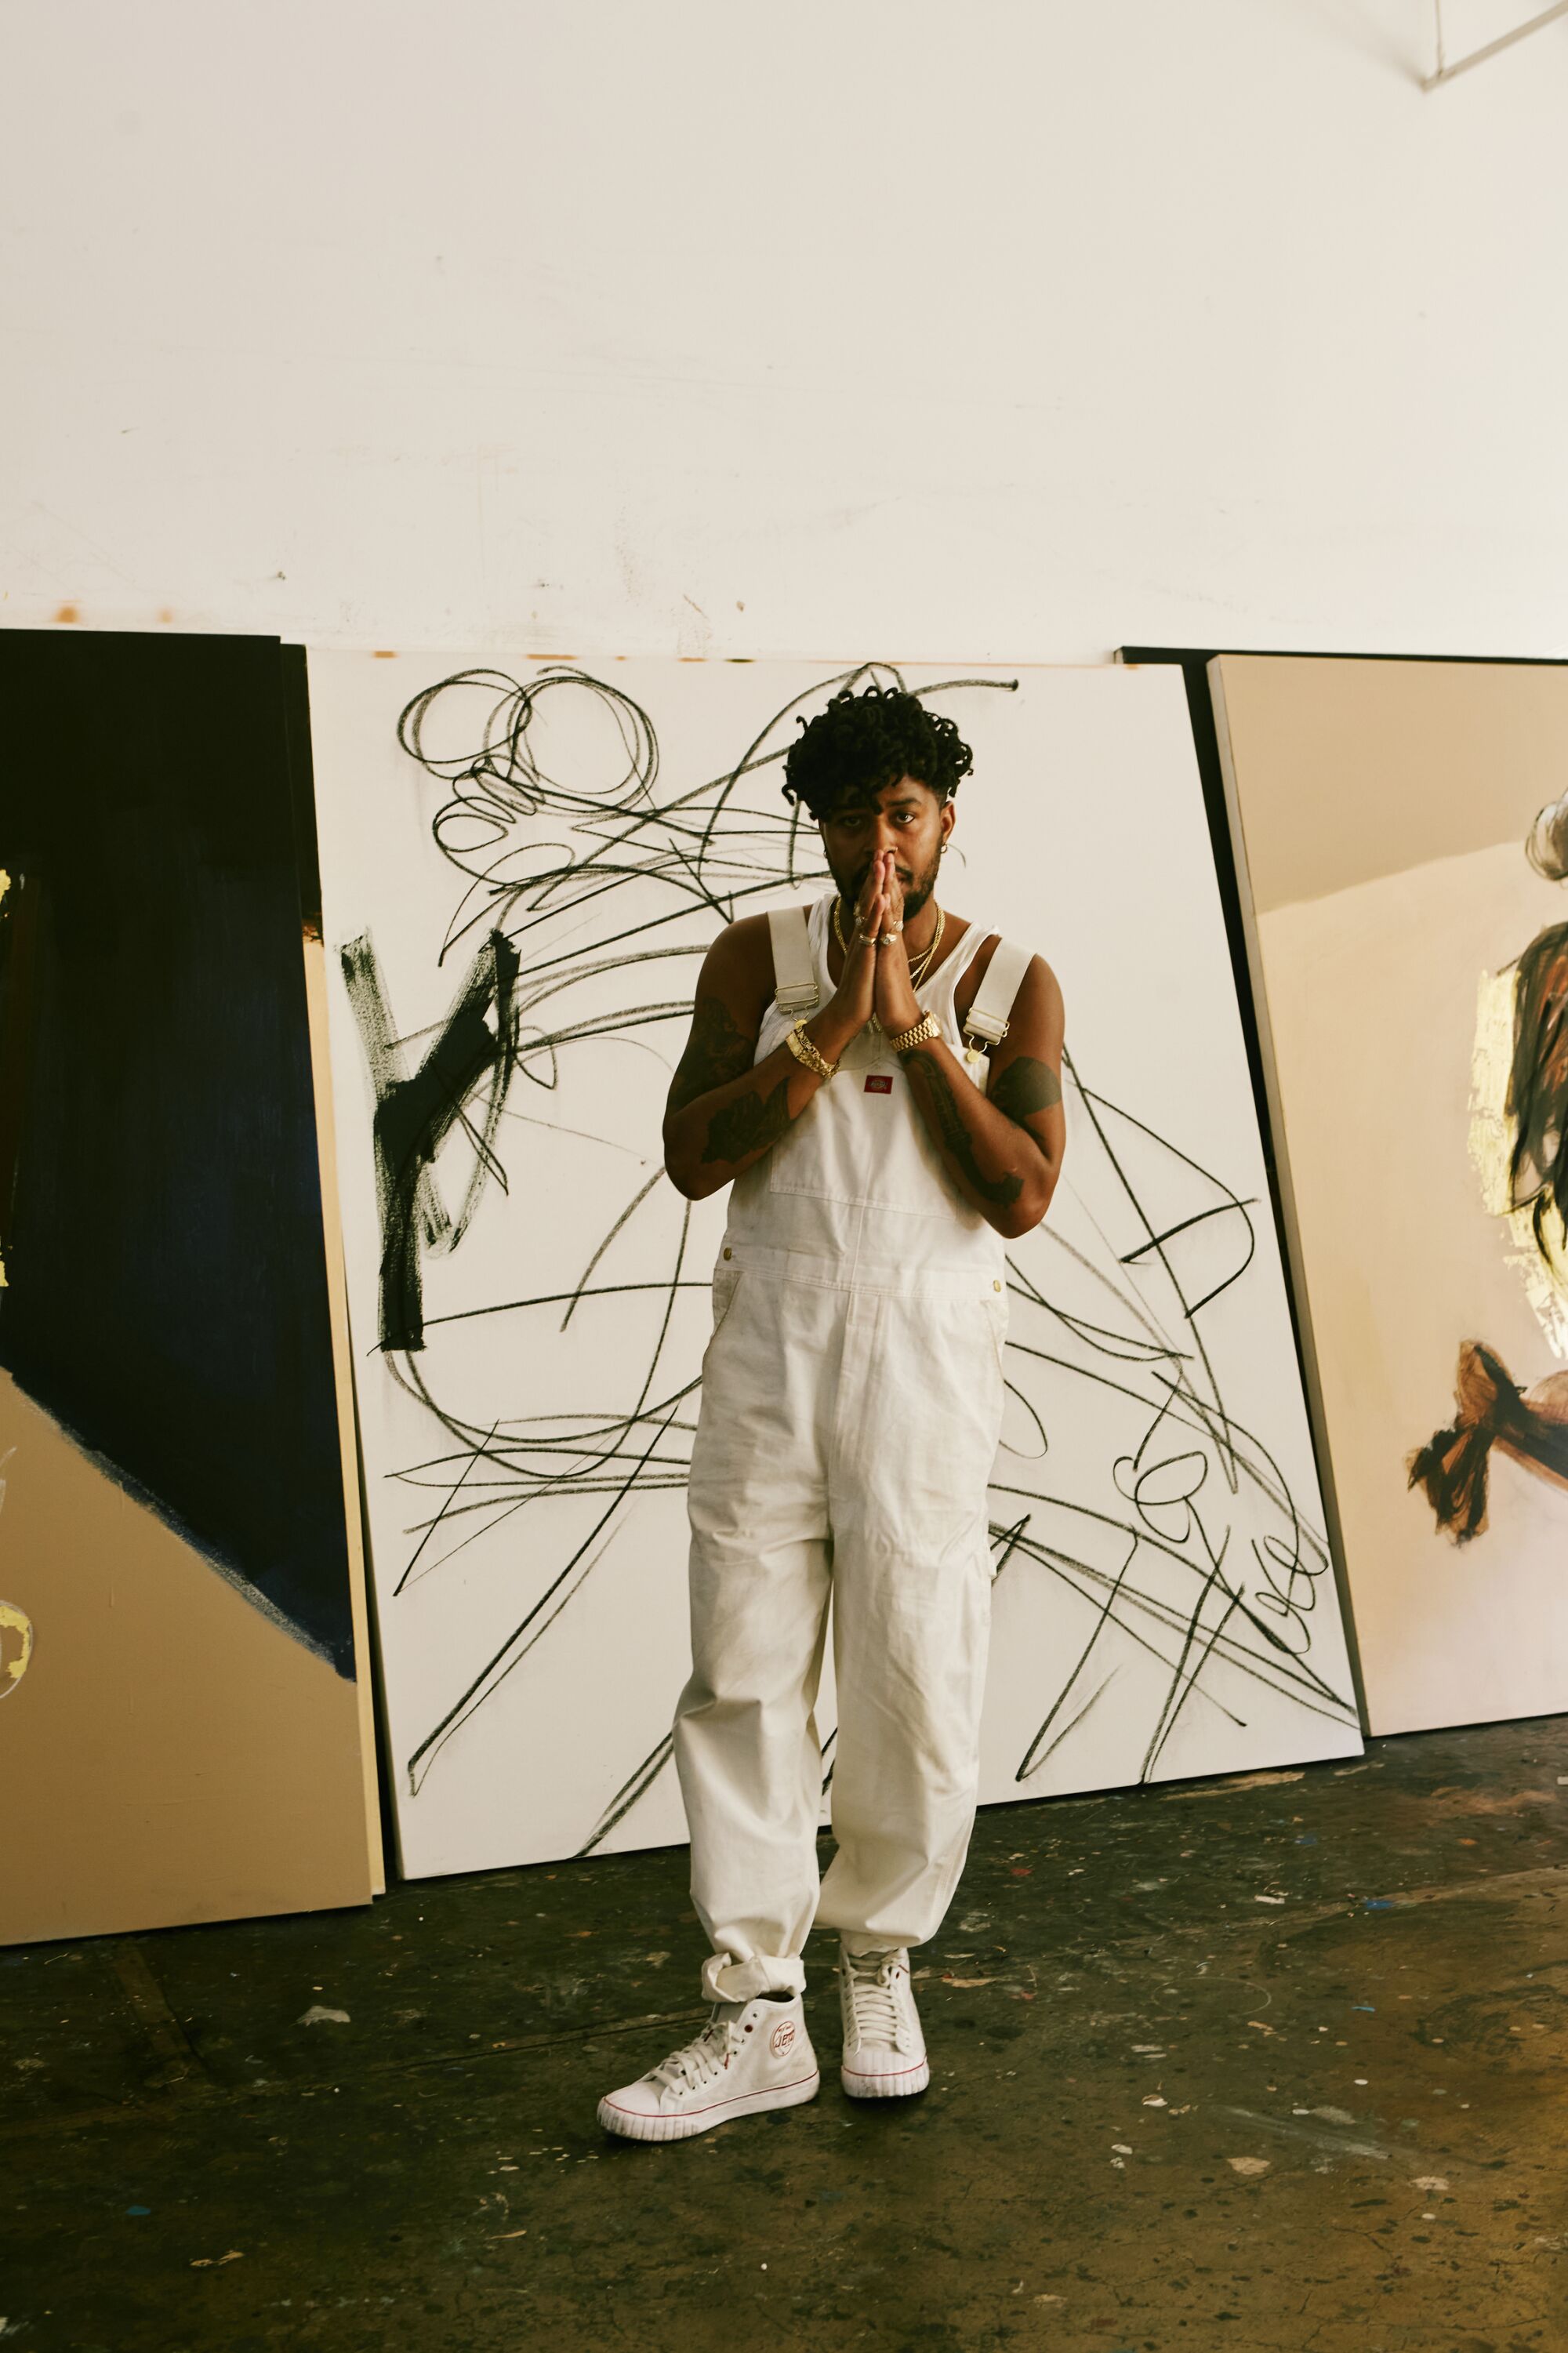 An artist in white coveralls stands in front of an artwork